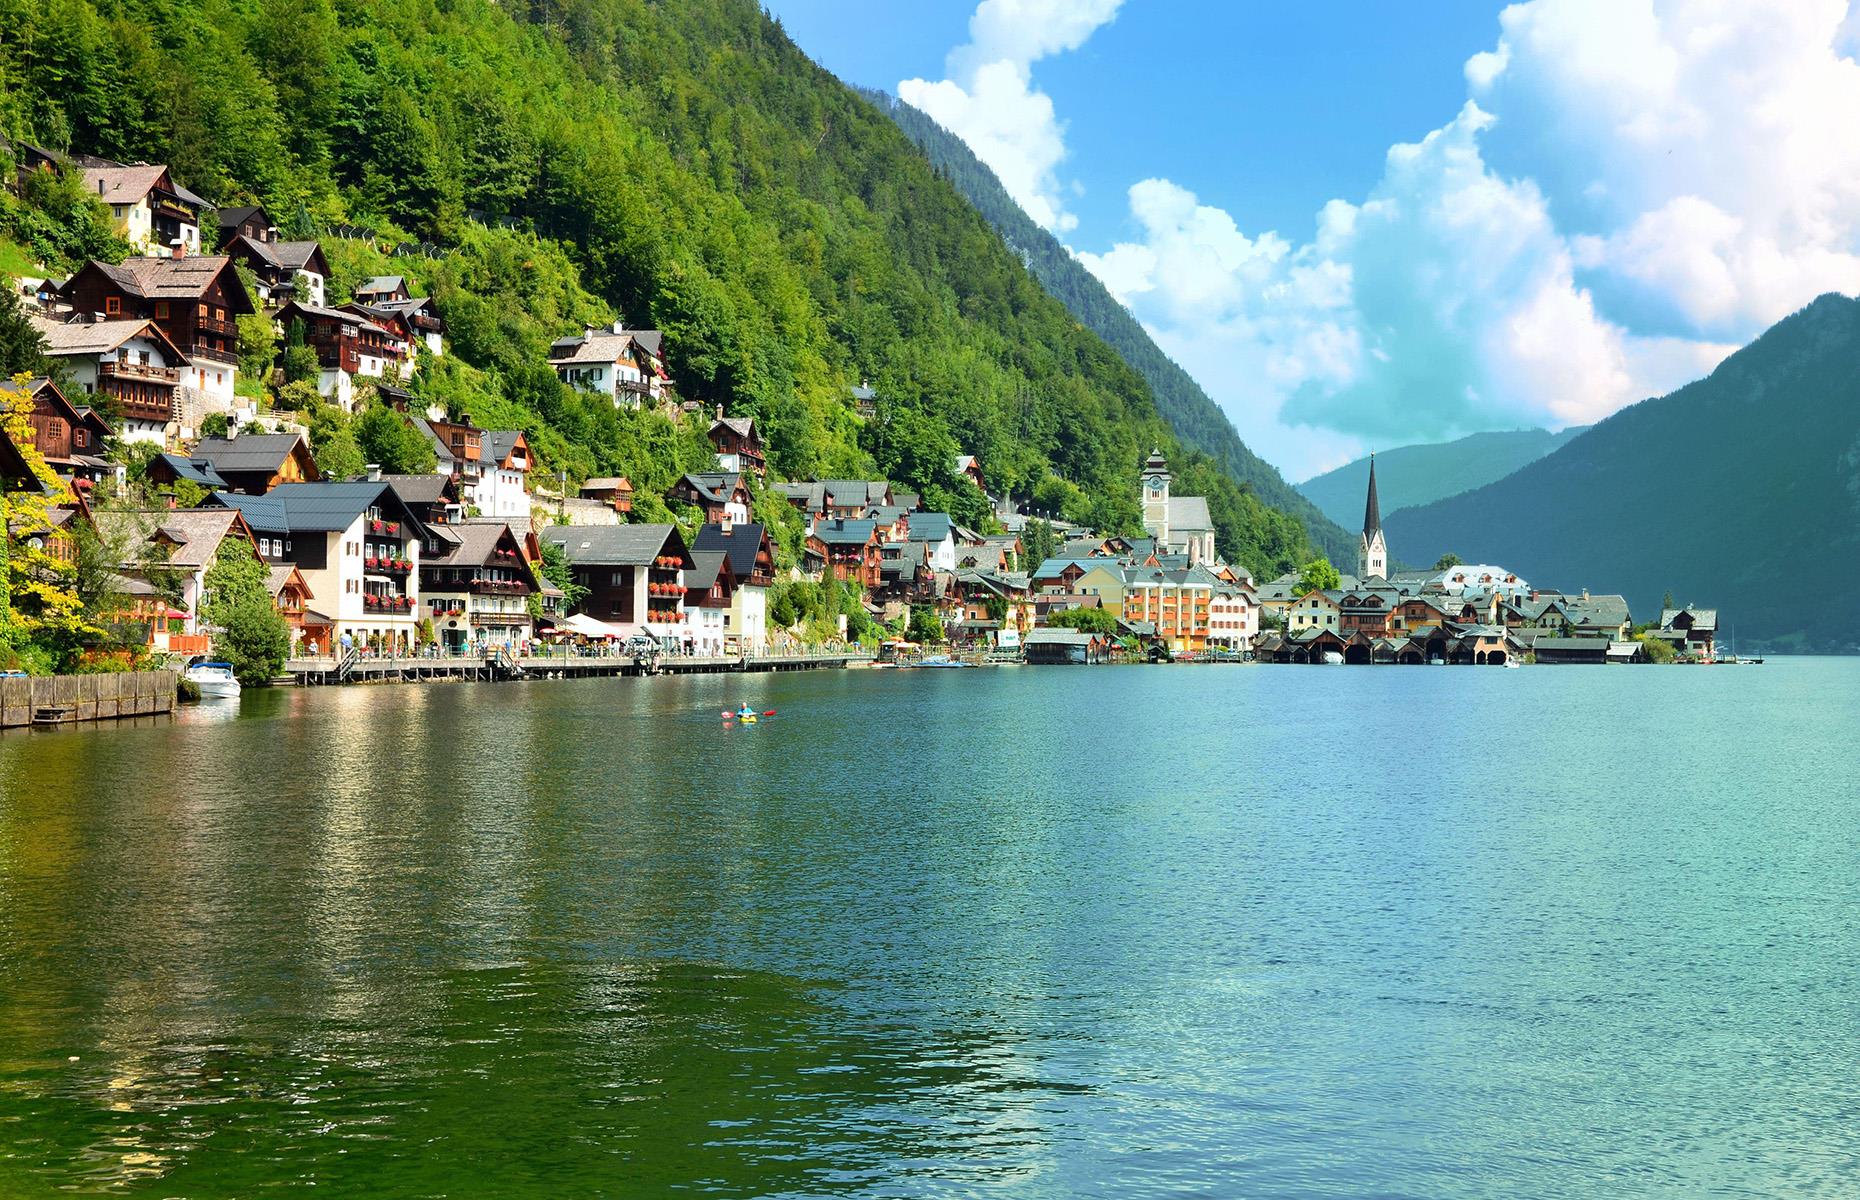 <p>Believed to have inspired <em>Frozen</em>’s Arandelle, the fairy-tale city of Hallstatt, Austria was averaging 10,000 visitors a day pre-pandemic. Determined to protect the UNESCO heritage site, the city’s mayor has implemented a number of measures to reduce foot traffic, including building wooden fences to obstruct lakeside selfie backdrops and capping the number of tour buses and cars permitted to enter the region, with the aim of reducing tourism by at least a third.</p>